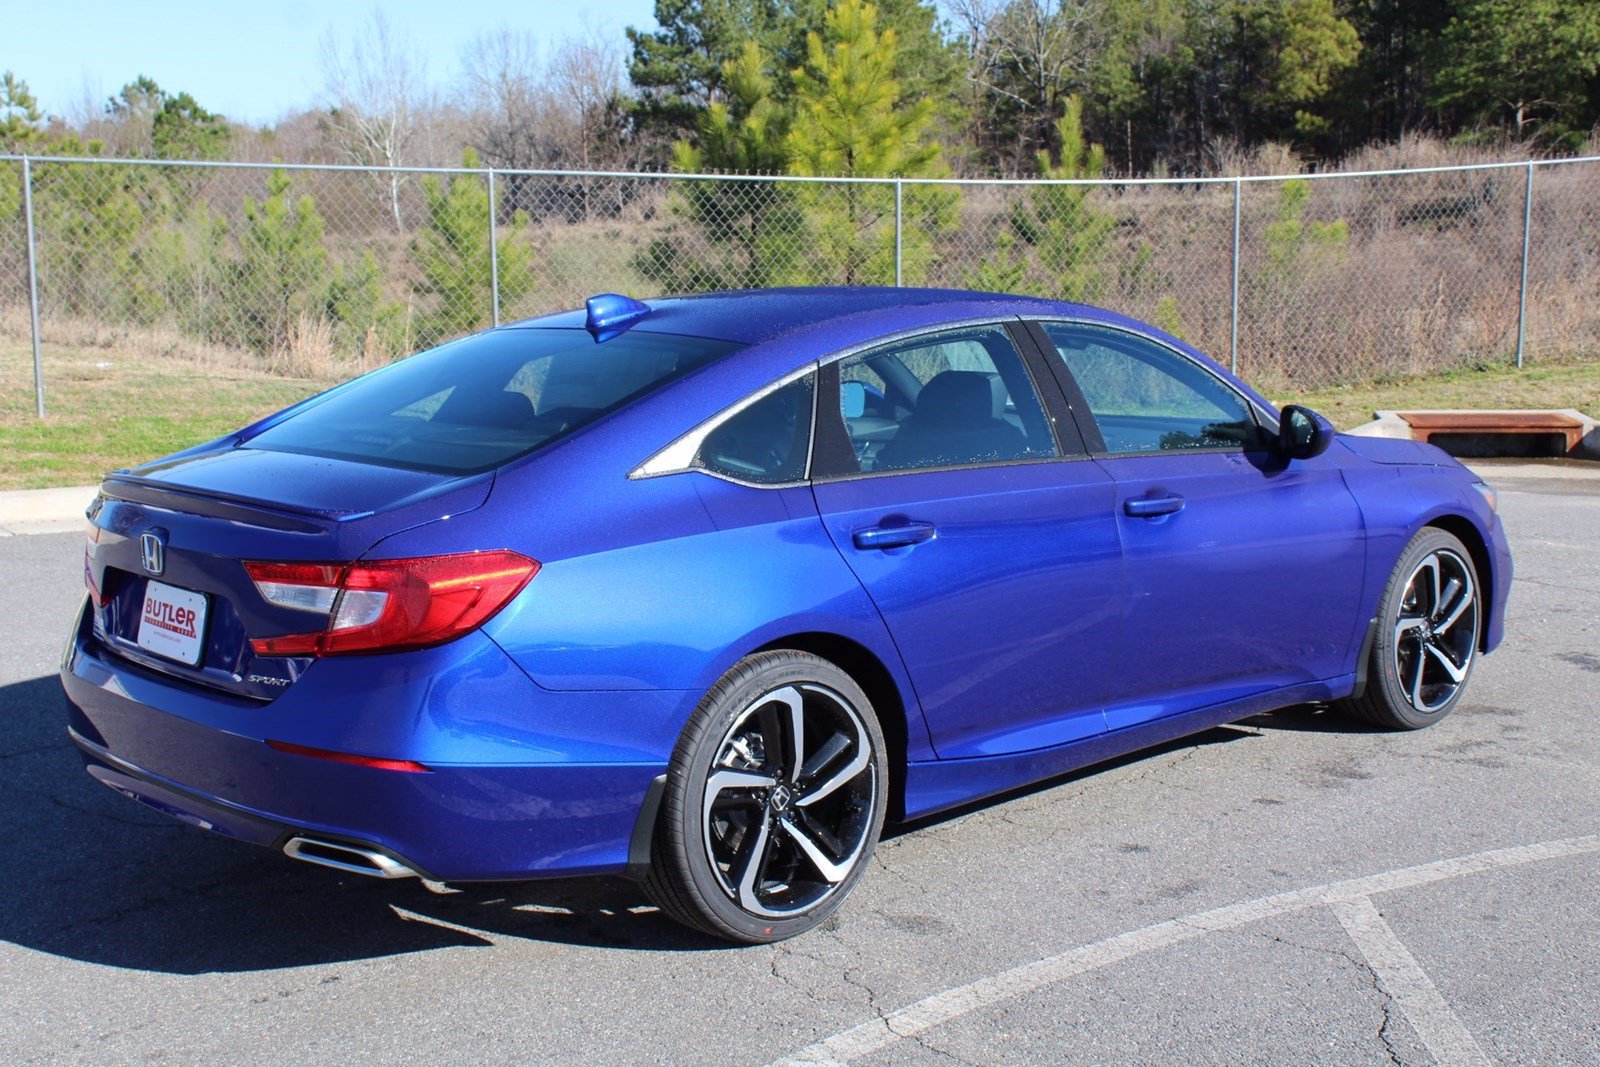 New 2020 Honda Accord Sport 1.5T 4dr Car in Milledgeville #H20136 | Butler Auto Group